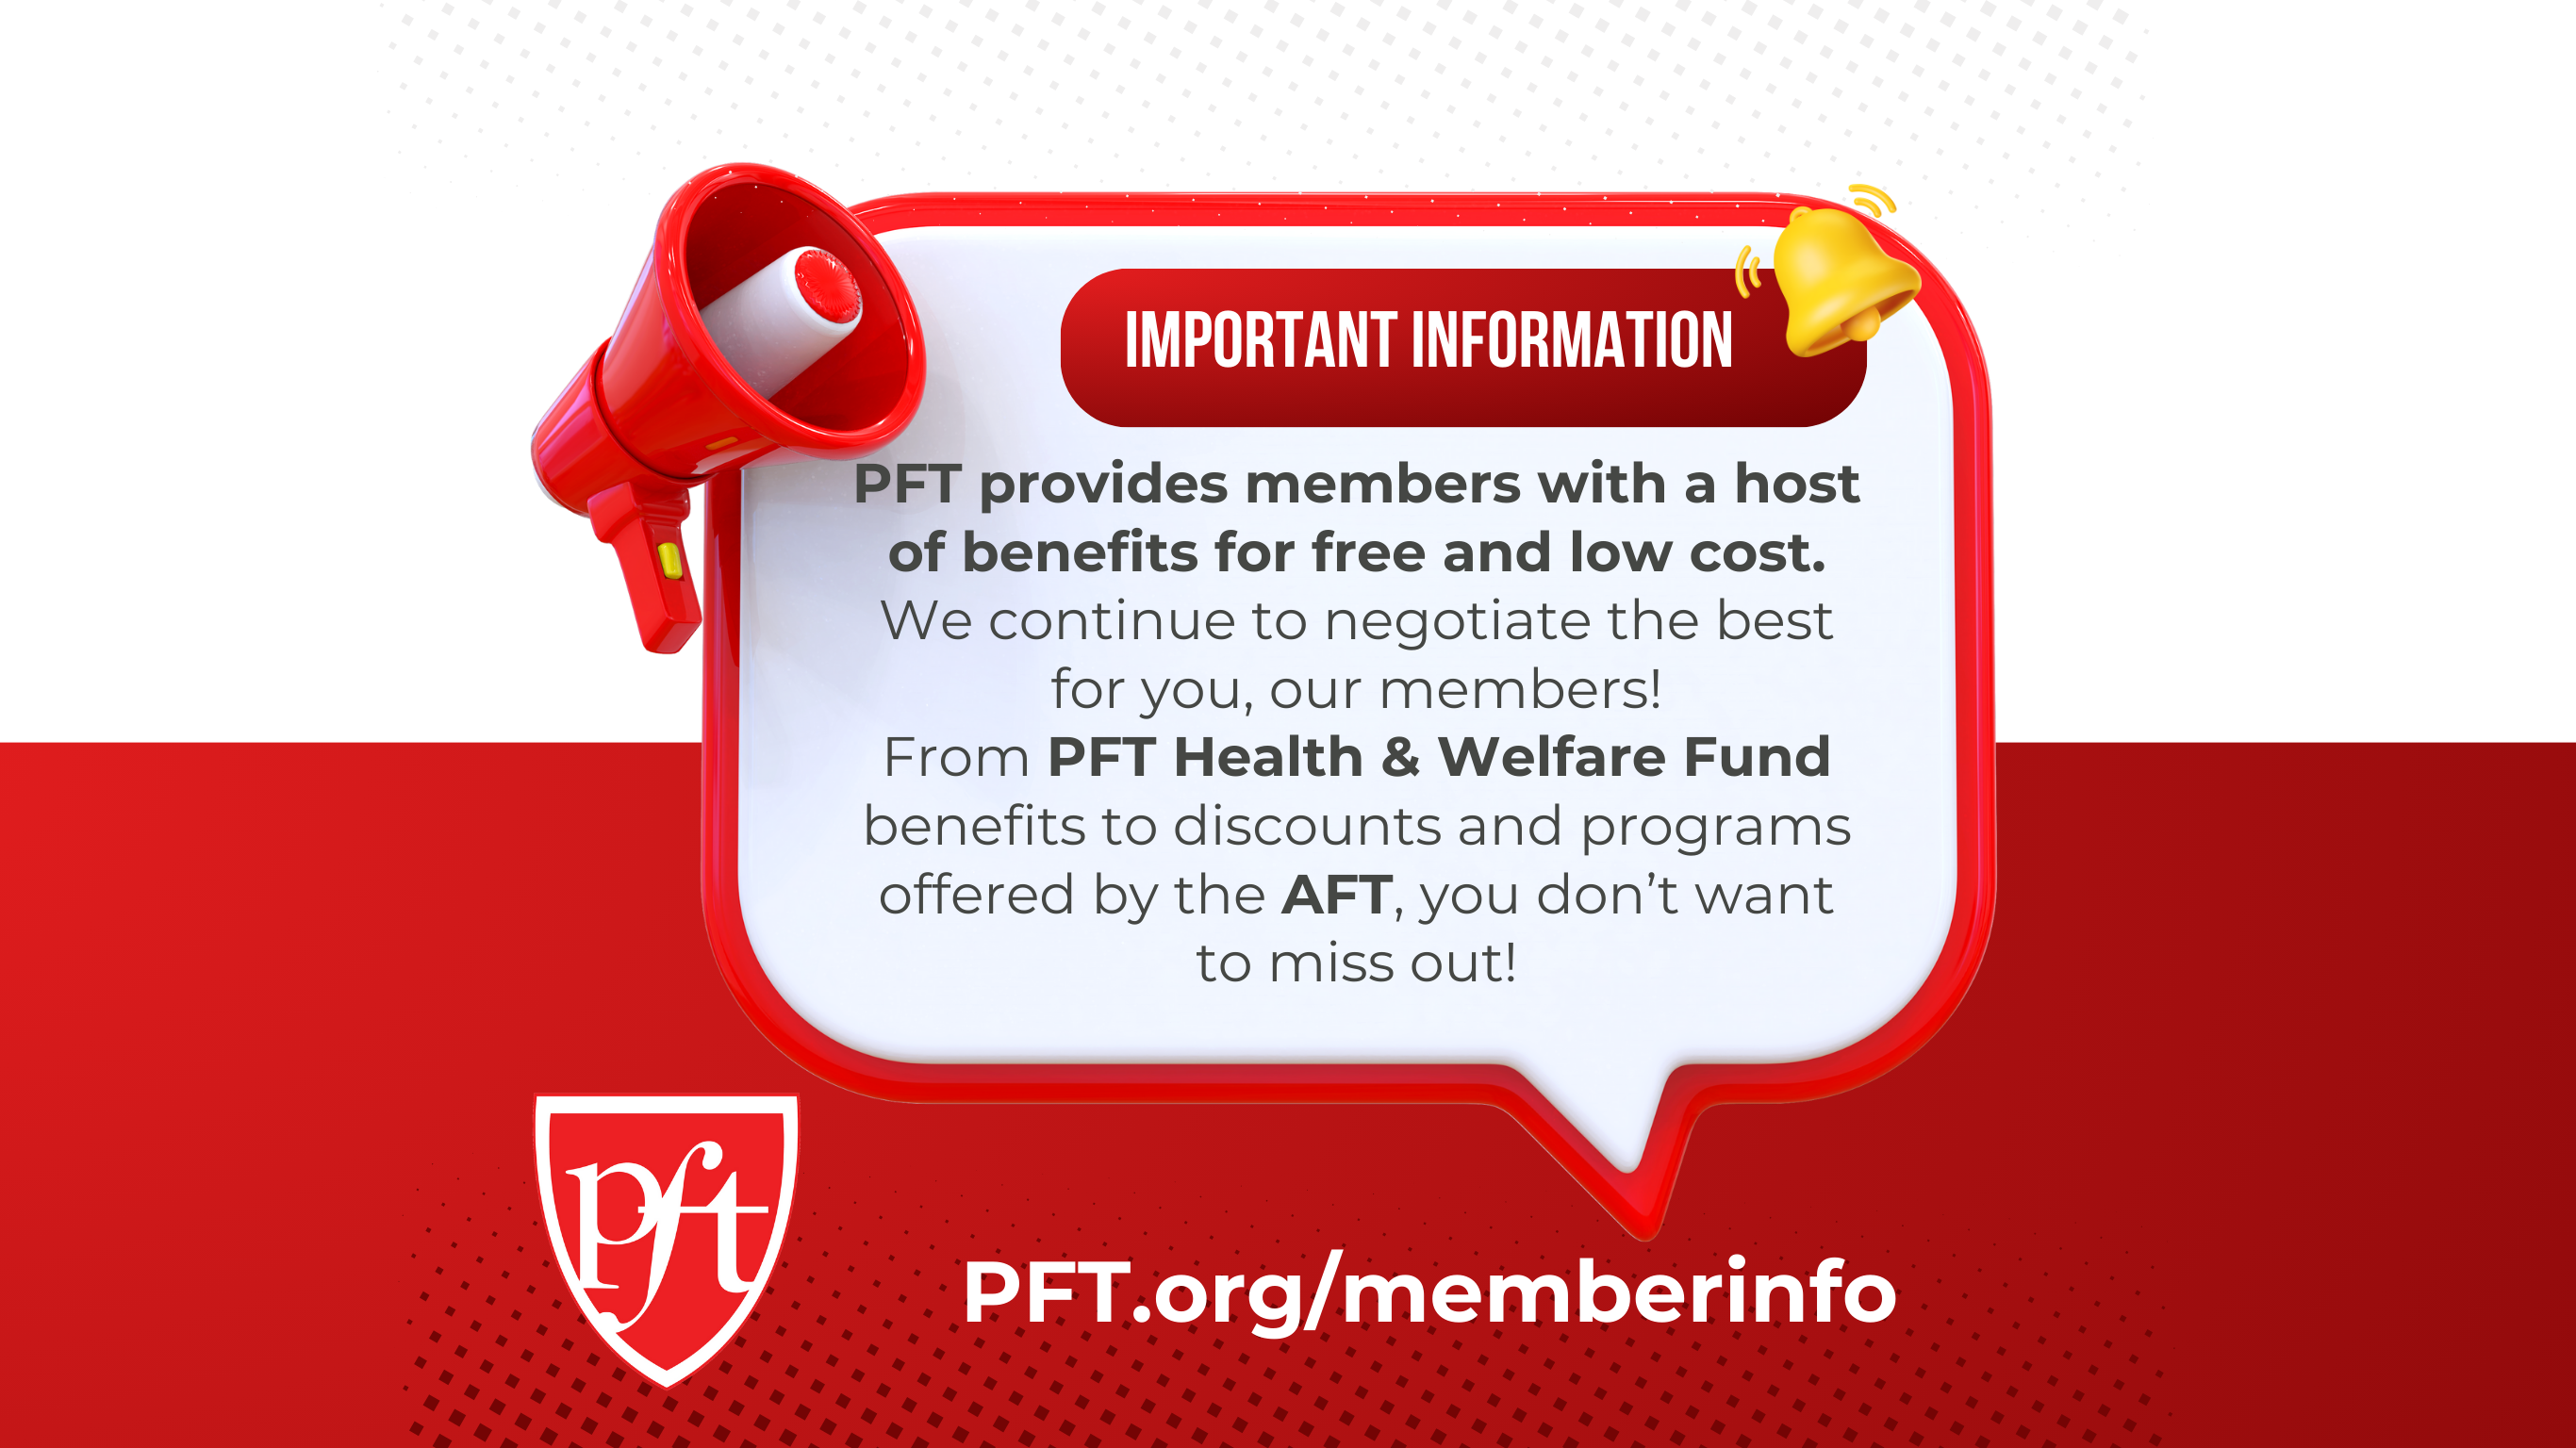 Important Information: PFT provides members with a host of benefits for free and low cost.